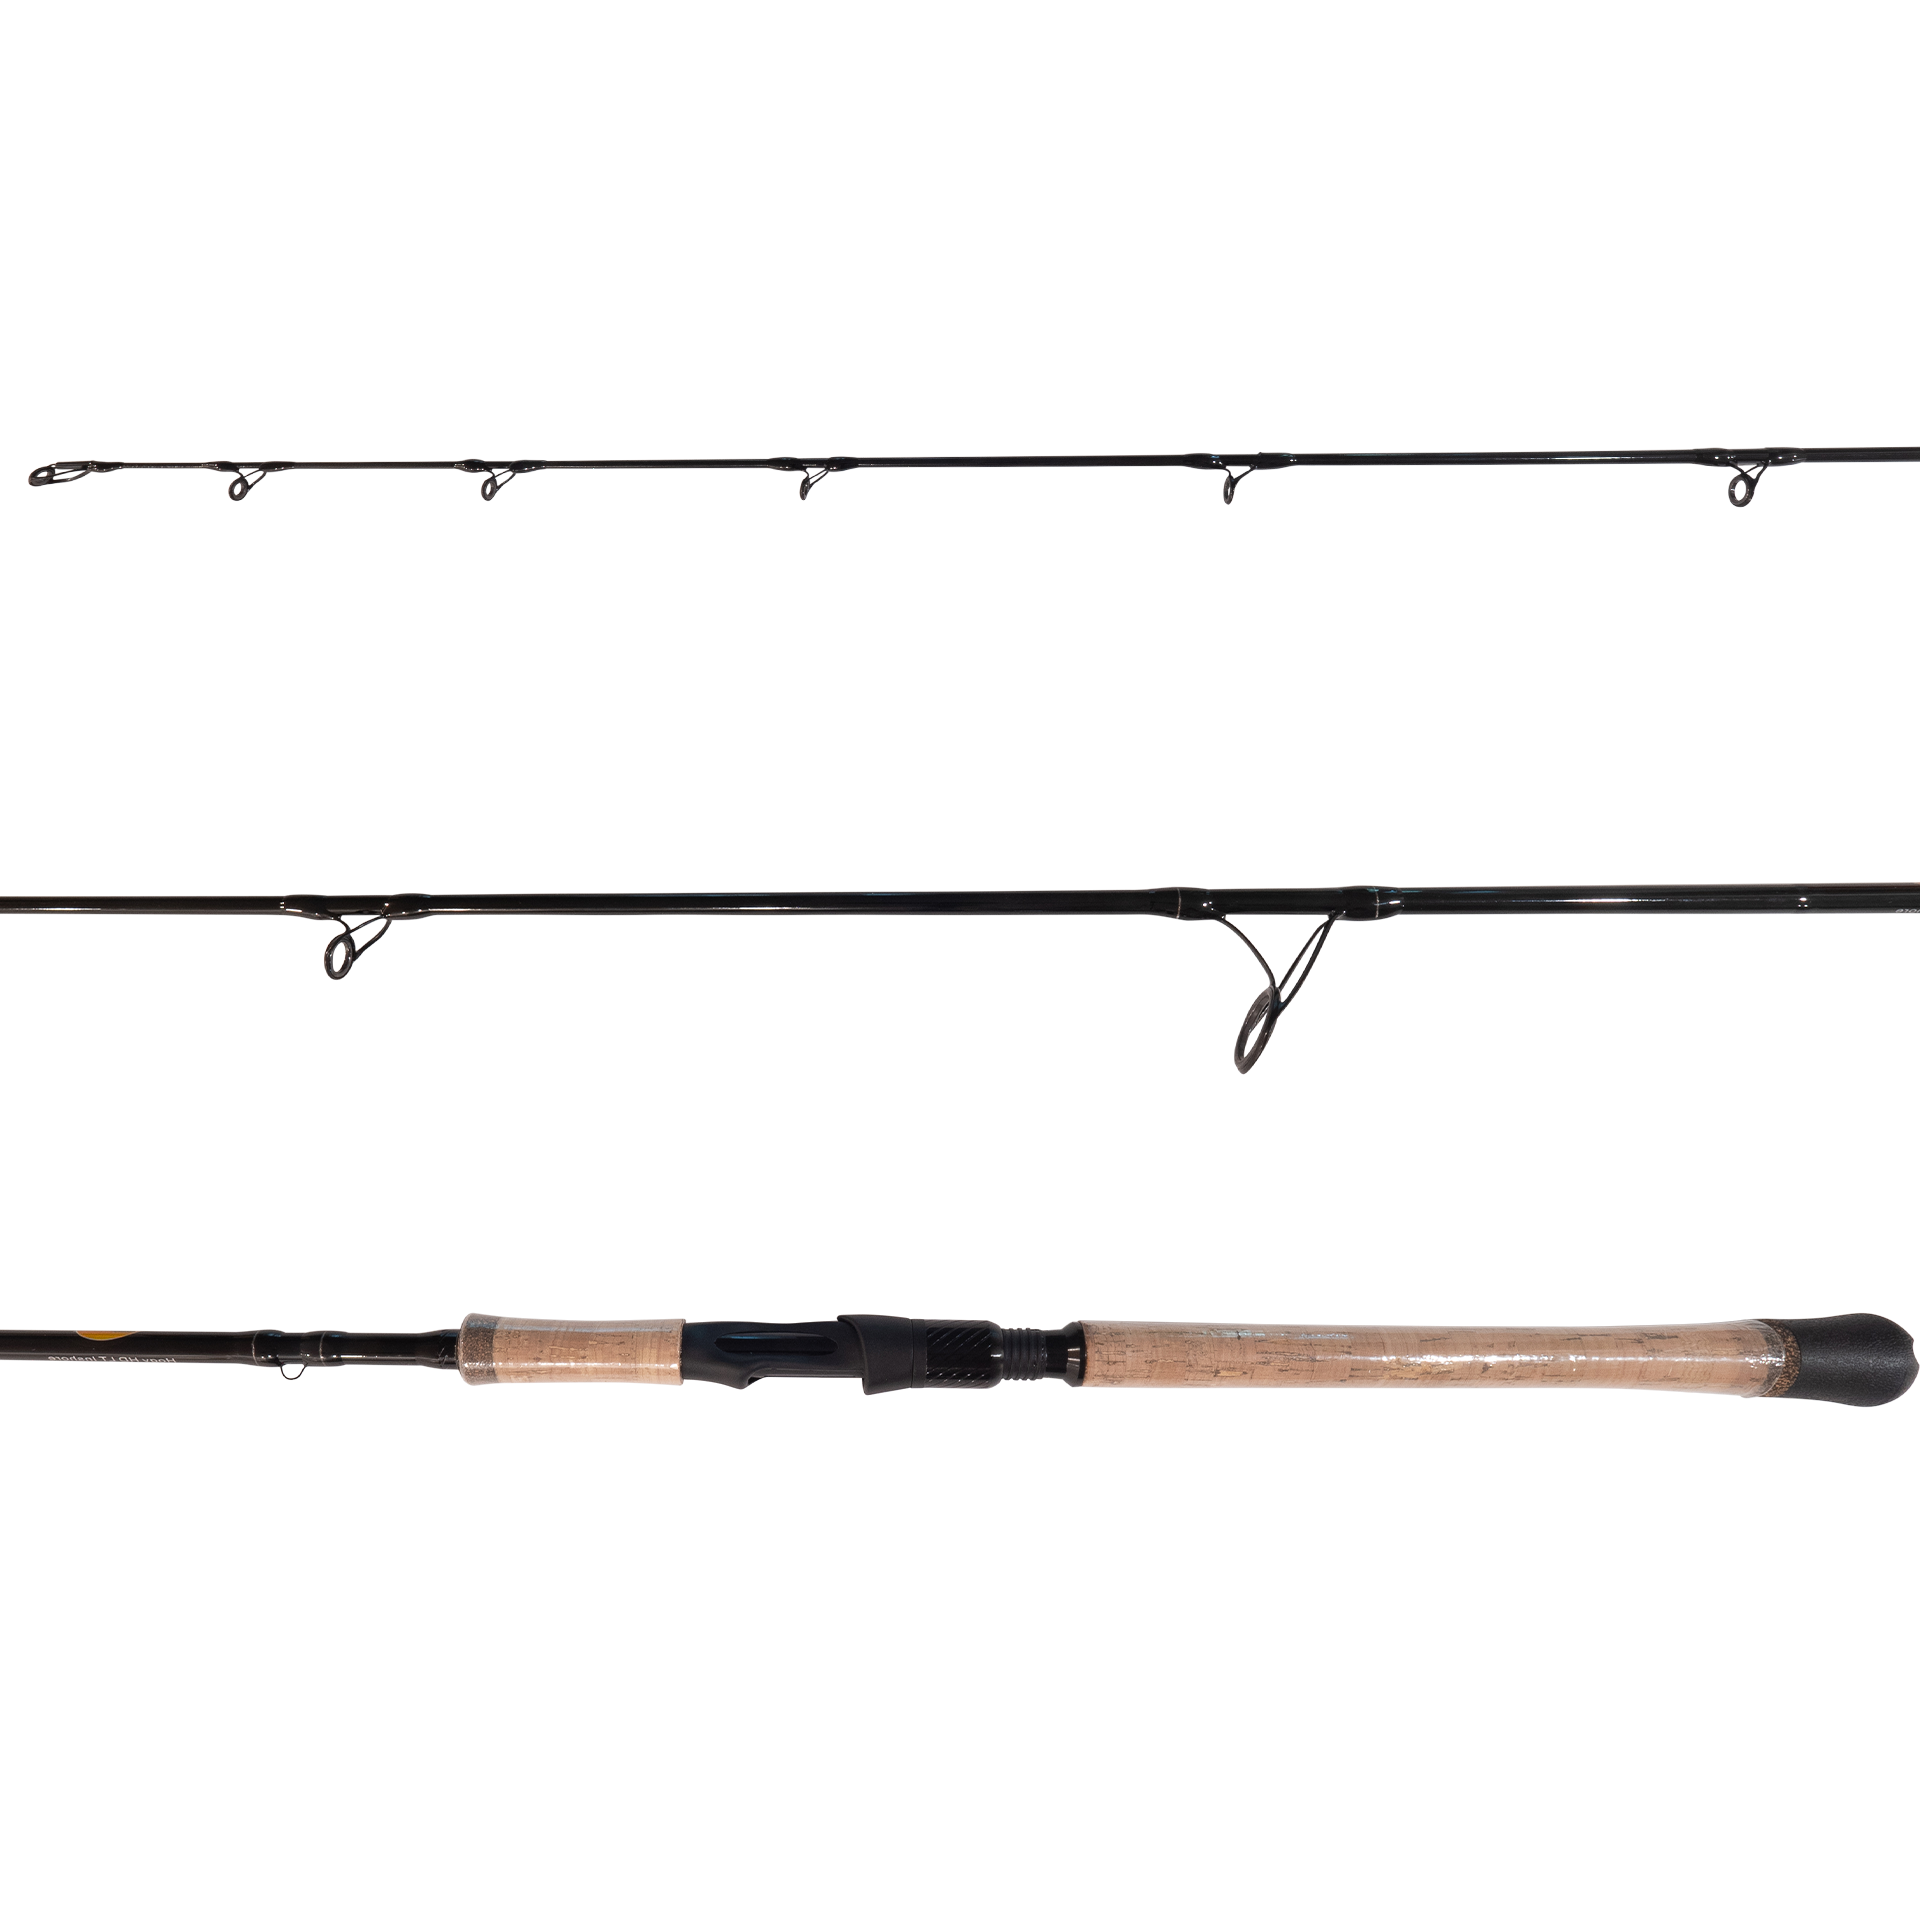 FTO Pre-Order Special: Inshore Spinning Rod: Mod-Fast Action 7' ML (3/8oz - 1oz) (Ship Date By 5/15)